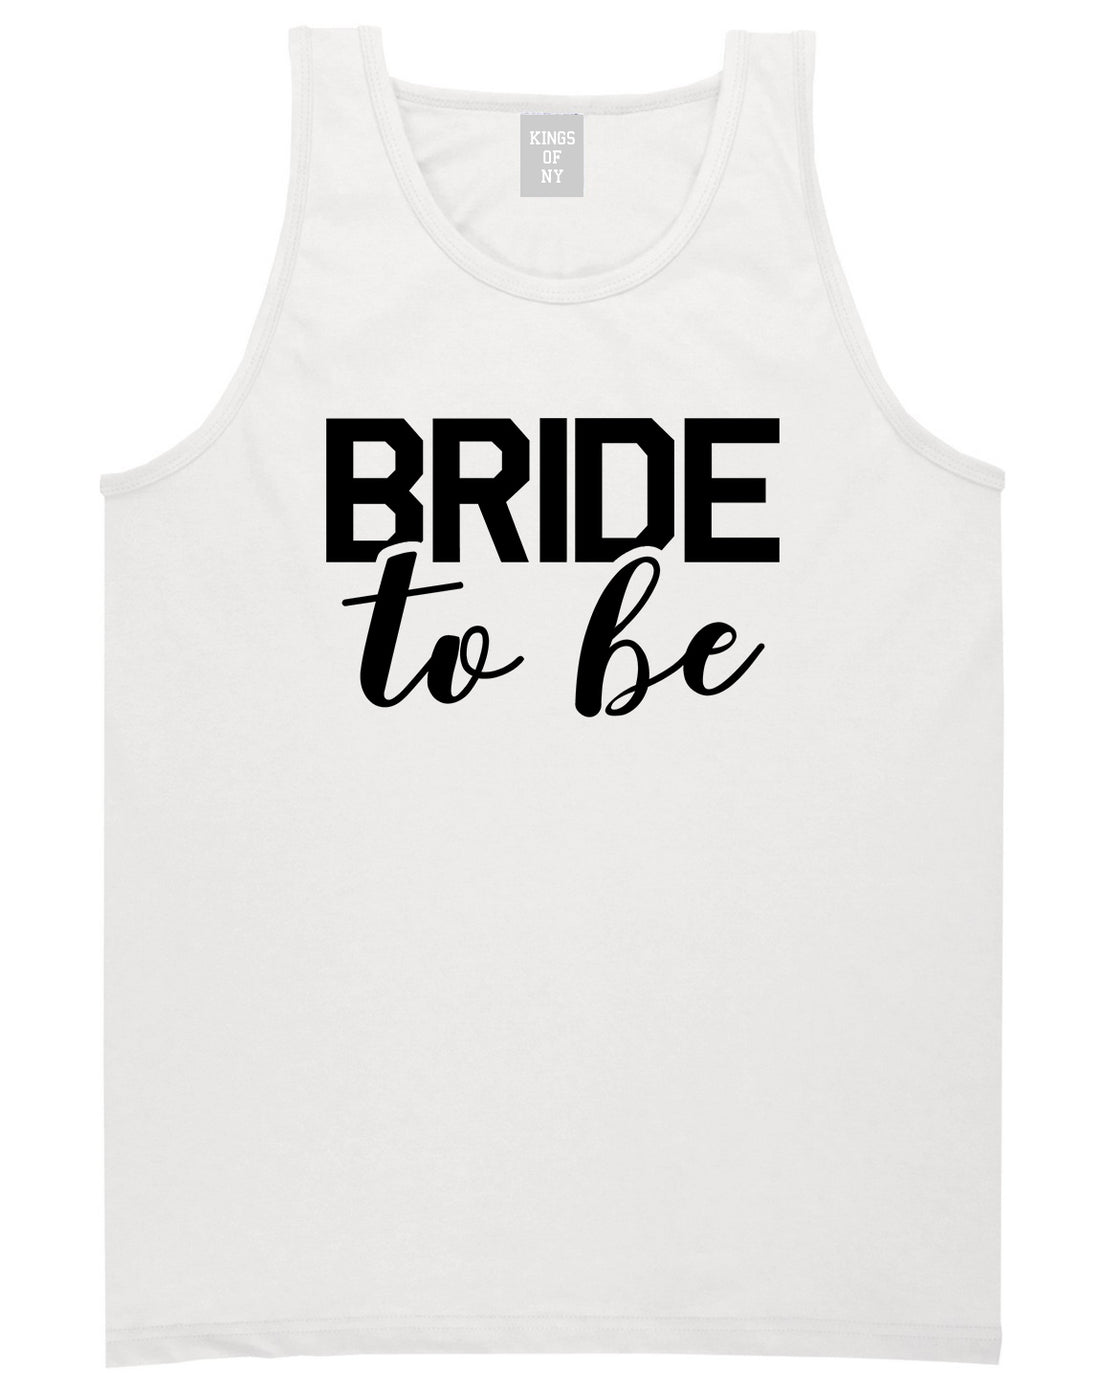 Bride To Be White Tank Top Shirt by Kings Of NY